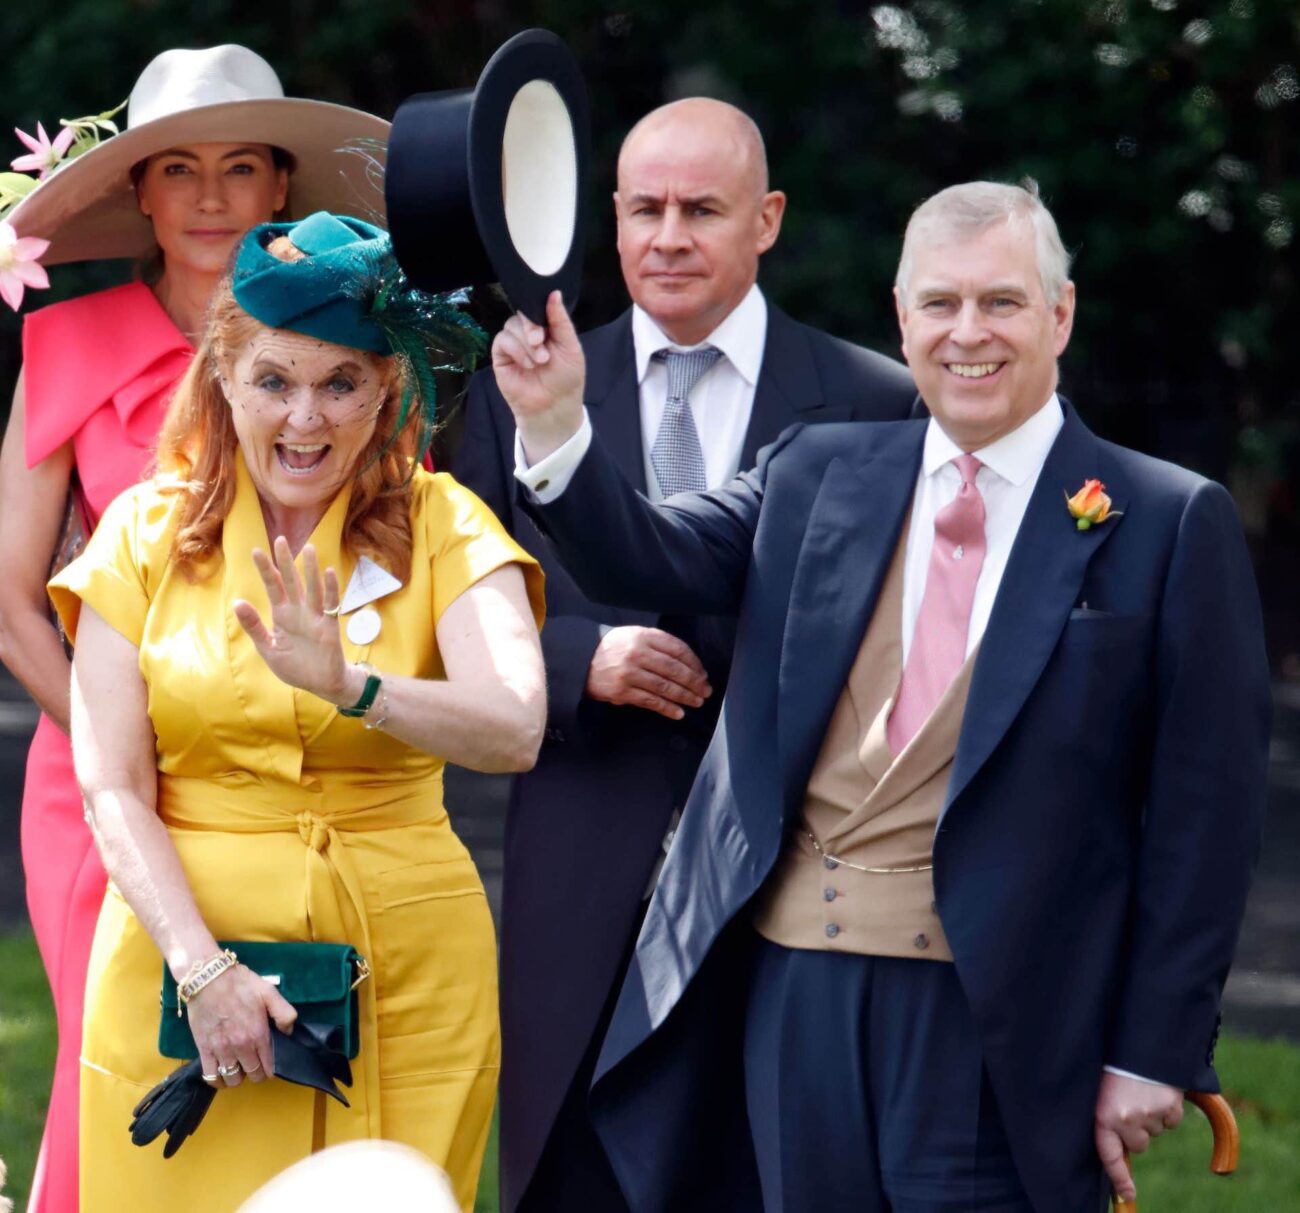 Prince Andrew seems to be canceled by everyone but his ex-wife Sarah Ferguson, who has devotedly defended him after all his allegations. Why though?